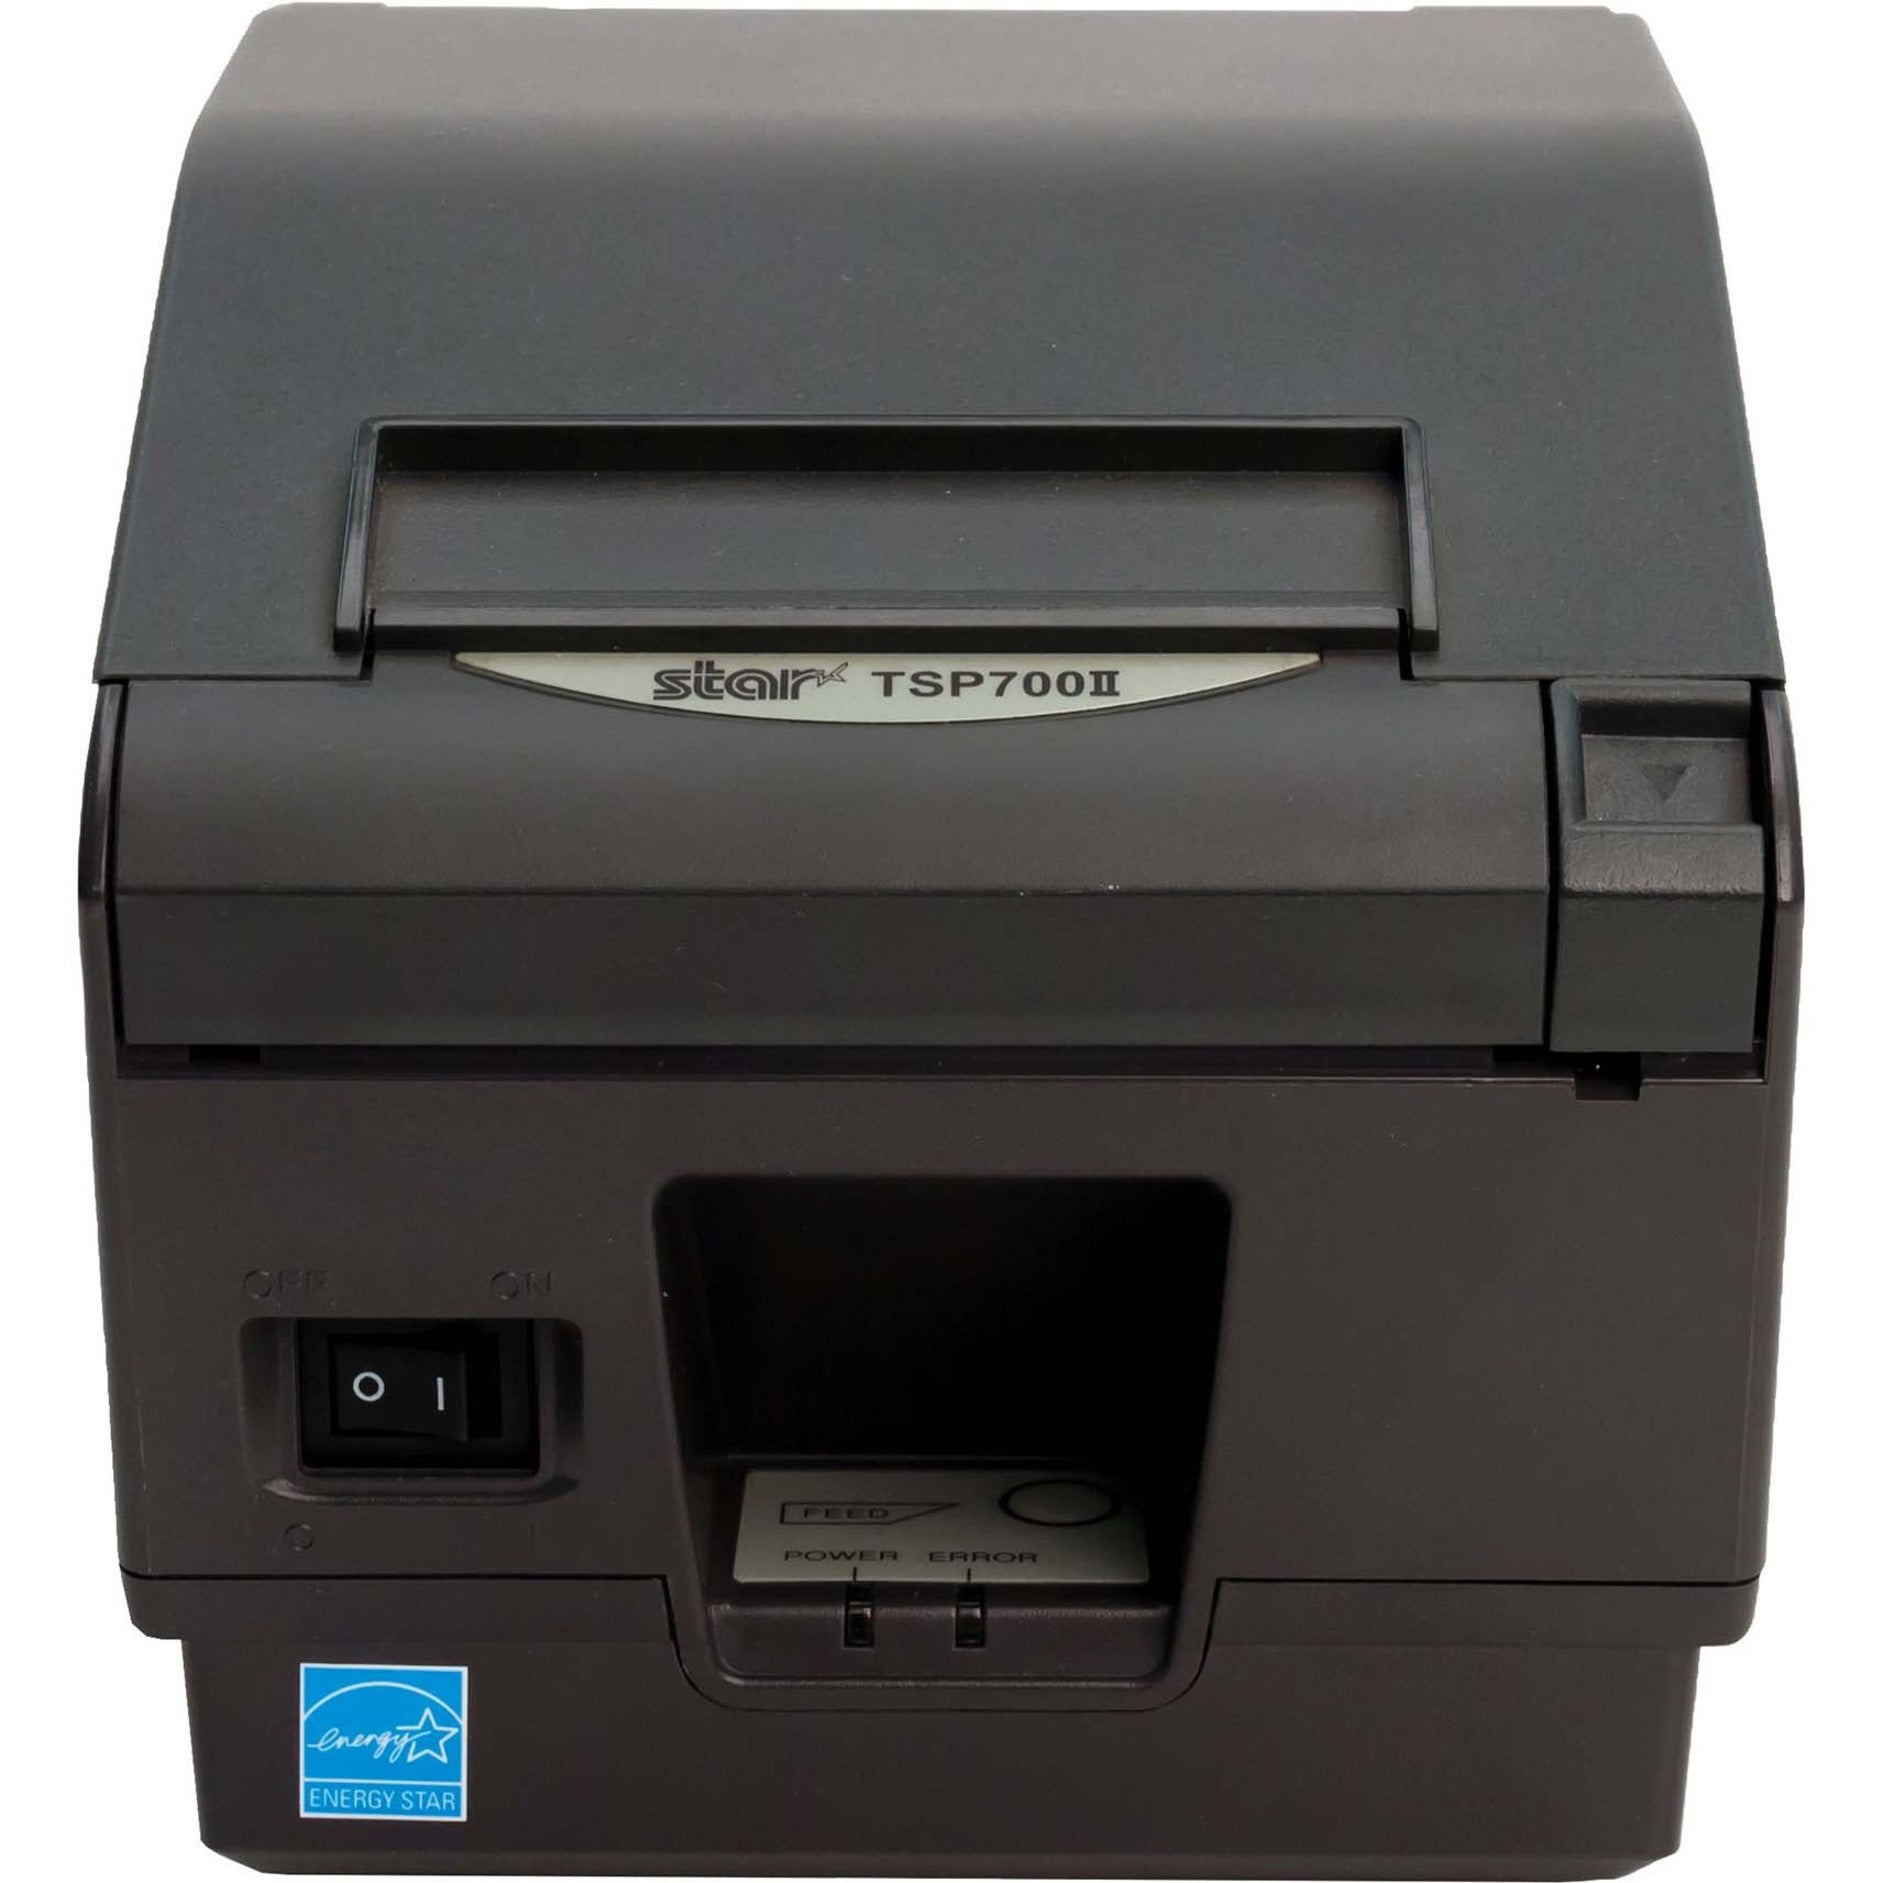 Star Micronics 37999950 TSP743IIL GRY TSP700II Thermal Printer, 2-Color Capable, Automatic Cutter